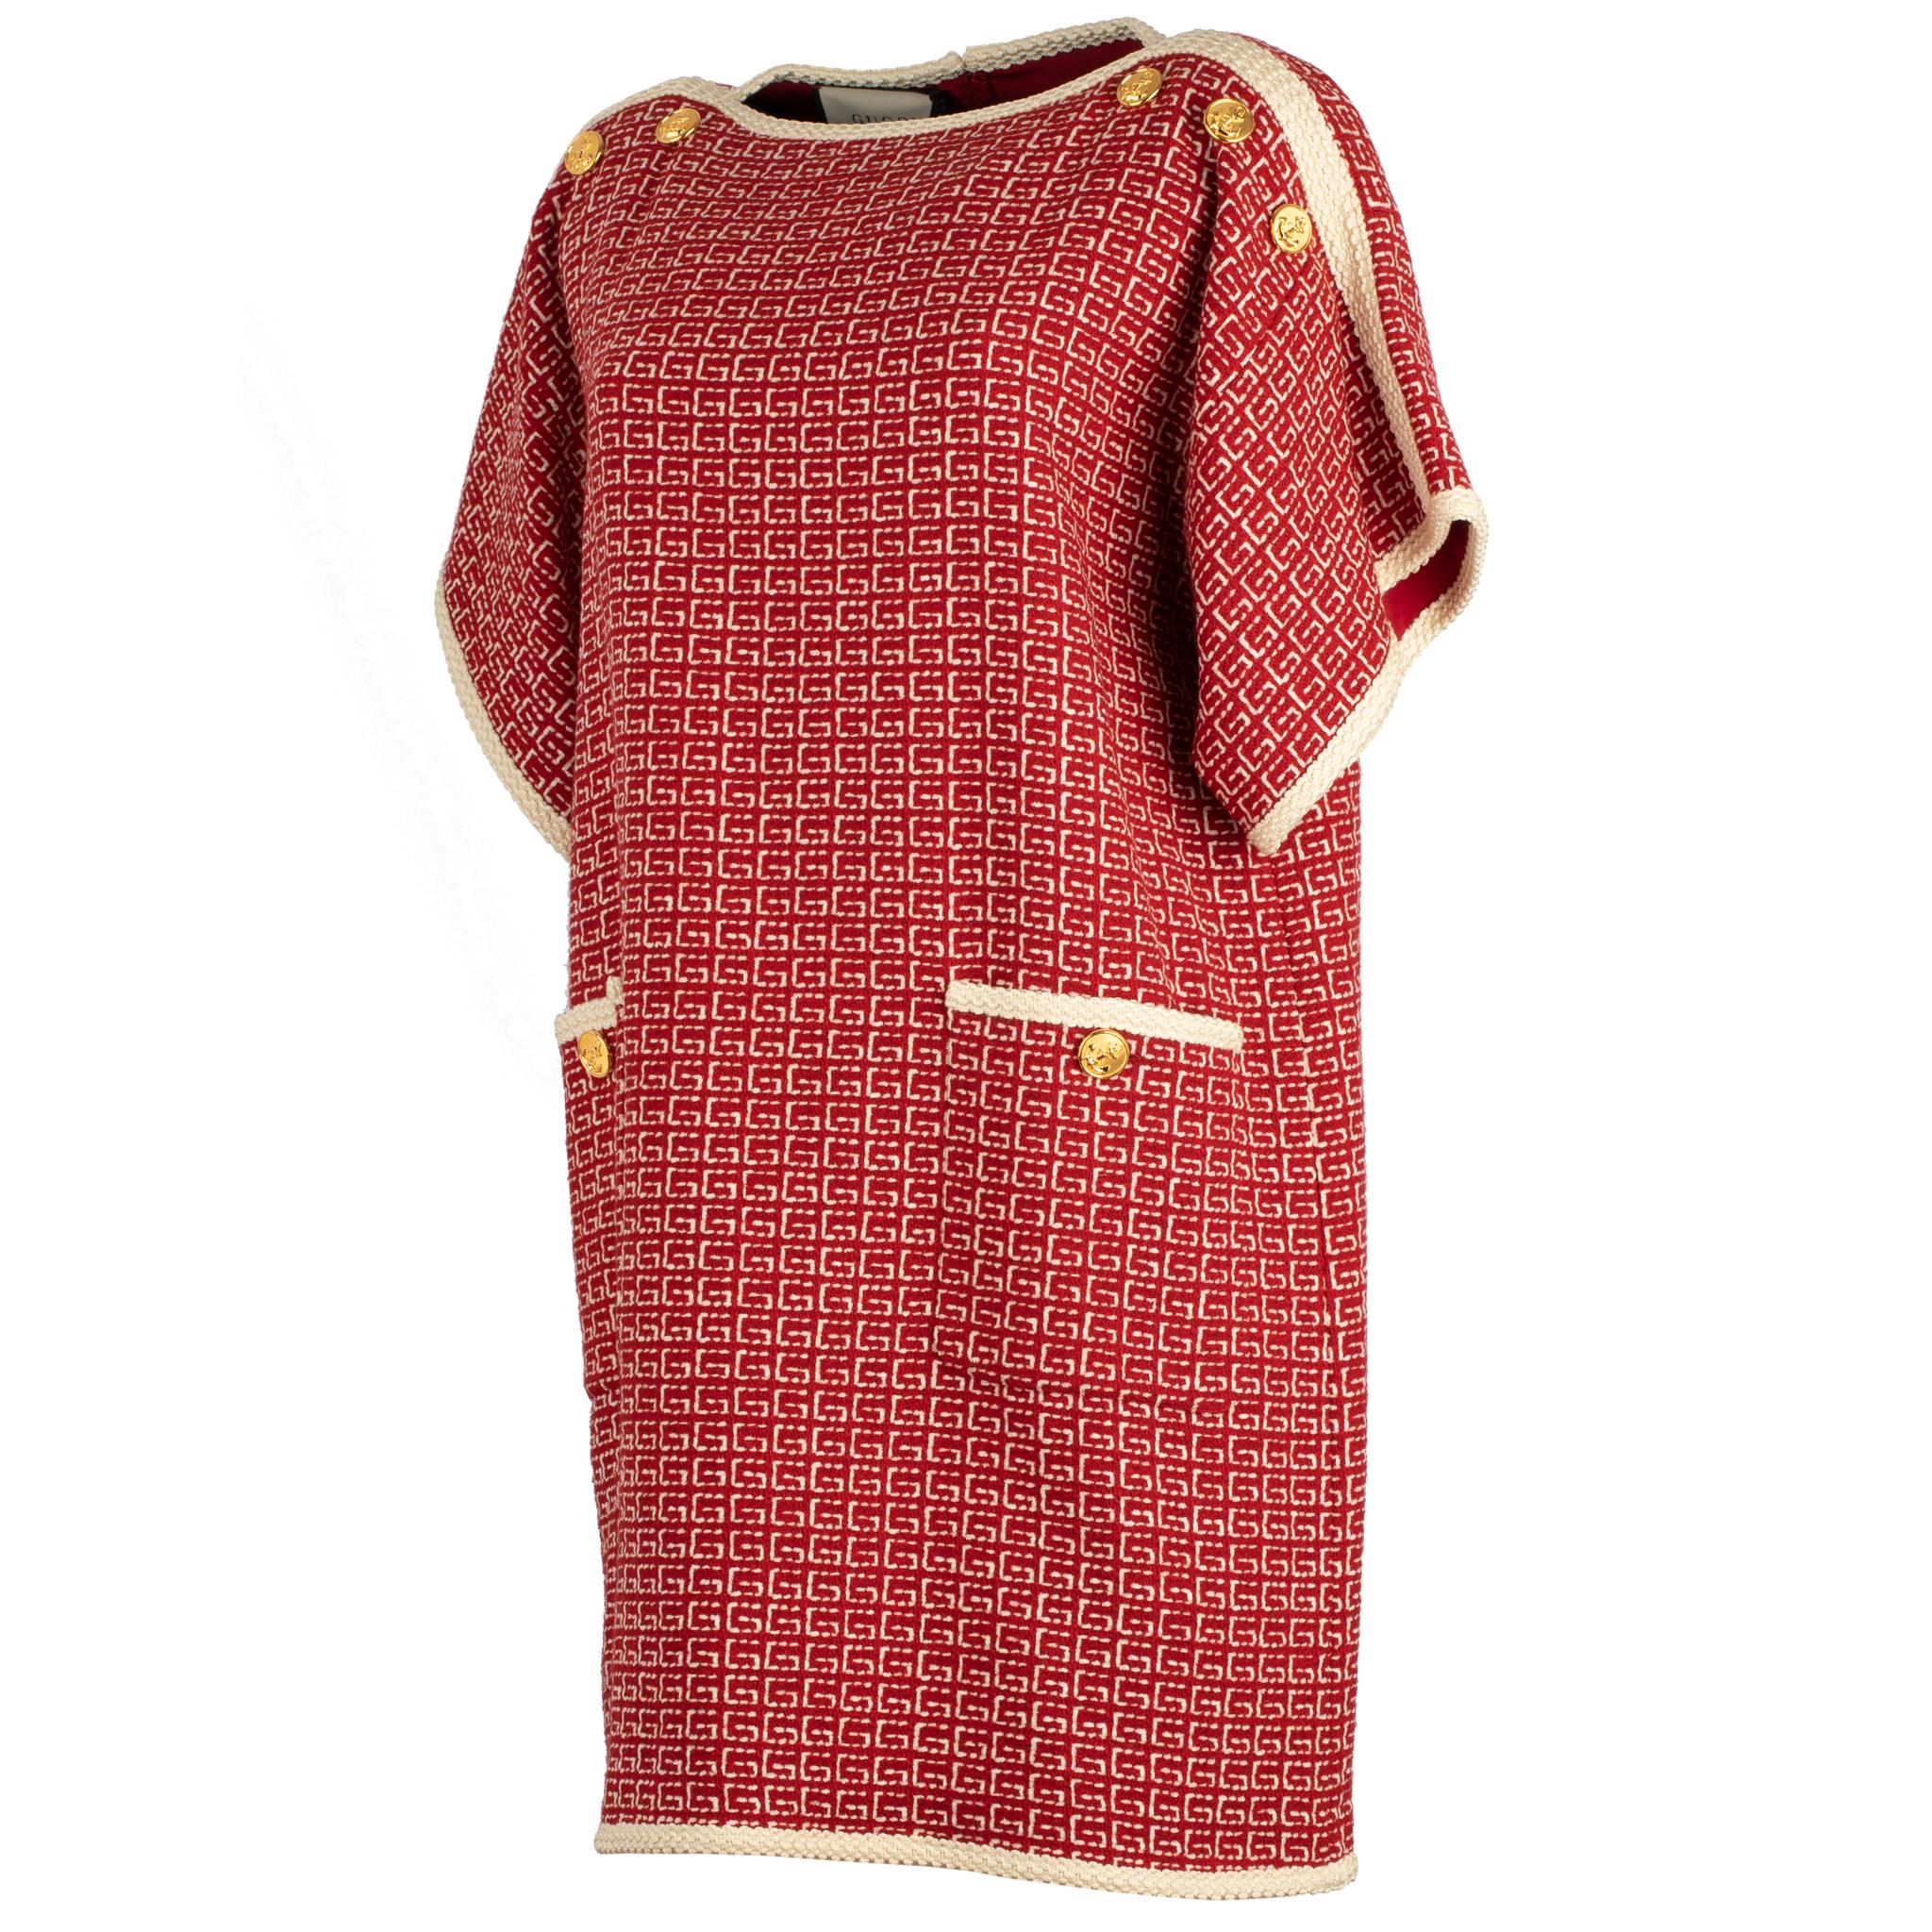 Gucci Tweed Red & Off-White Tunic Dress 38 IT For Sale 11